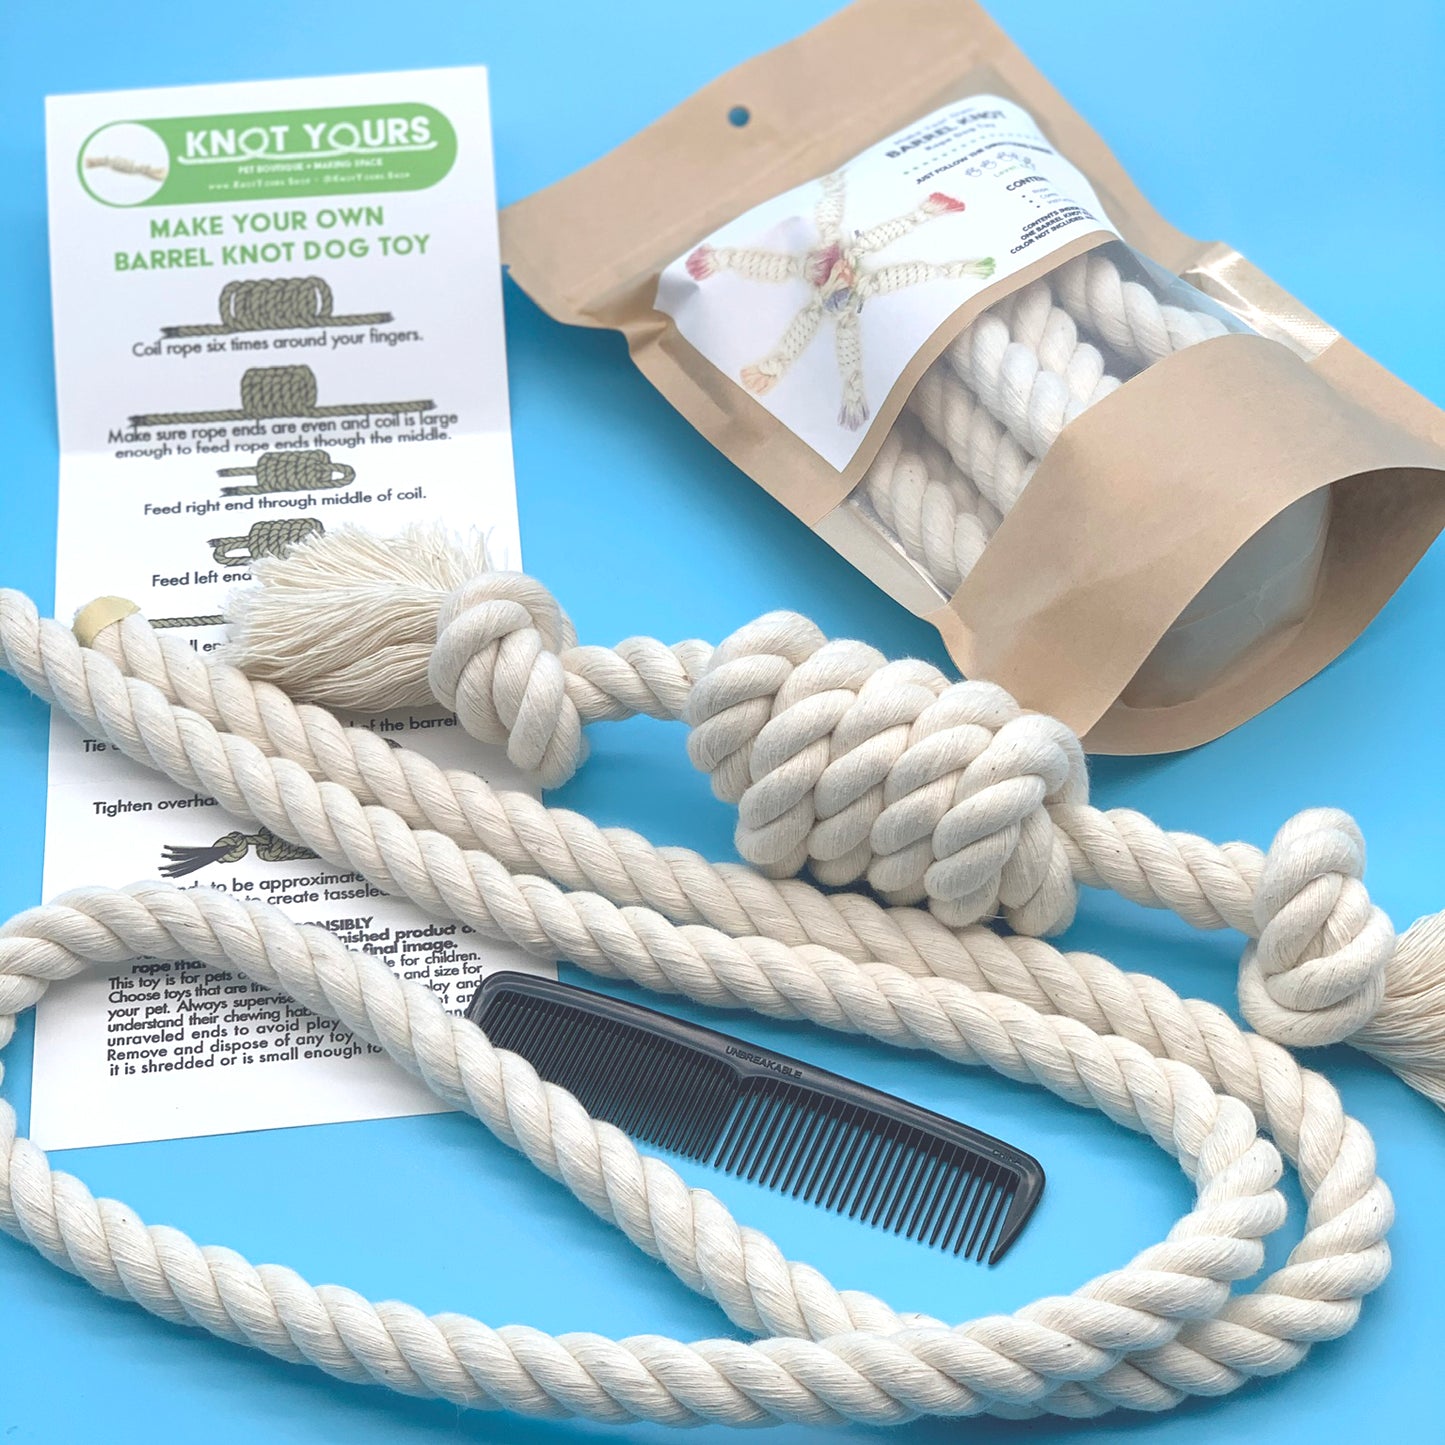 Make Your Own Barrel Knot Rope Toy